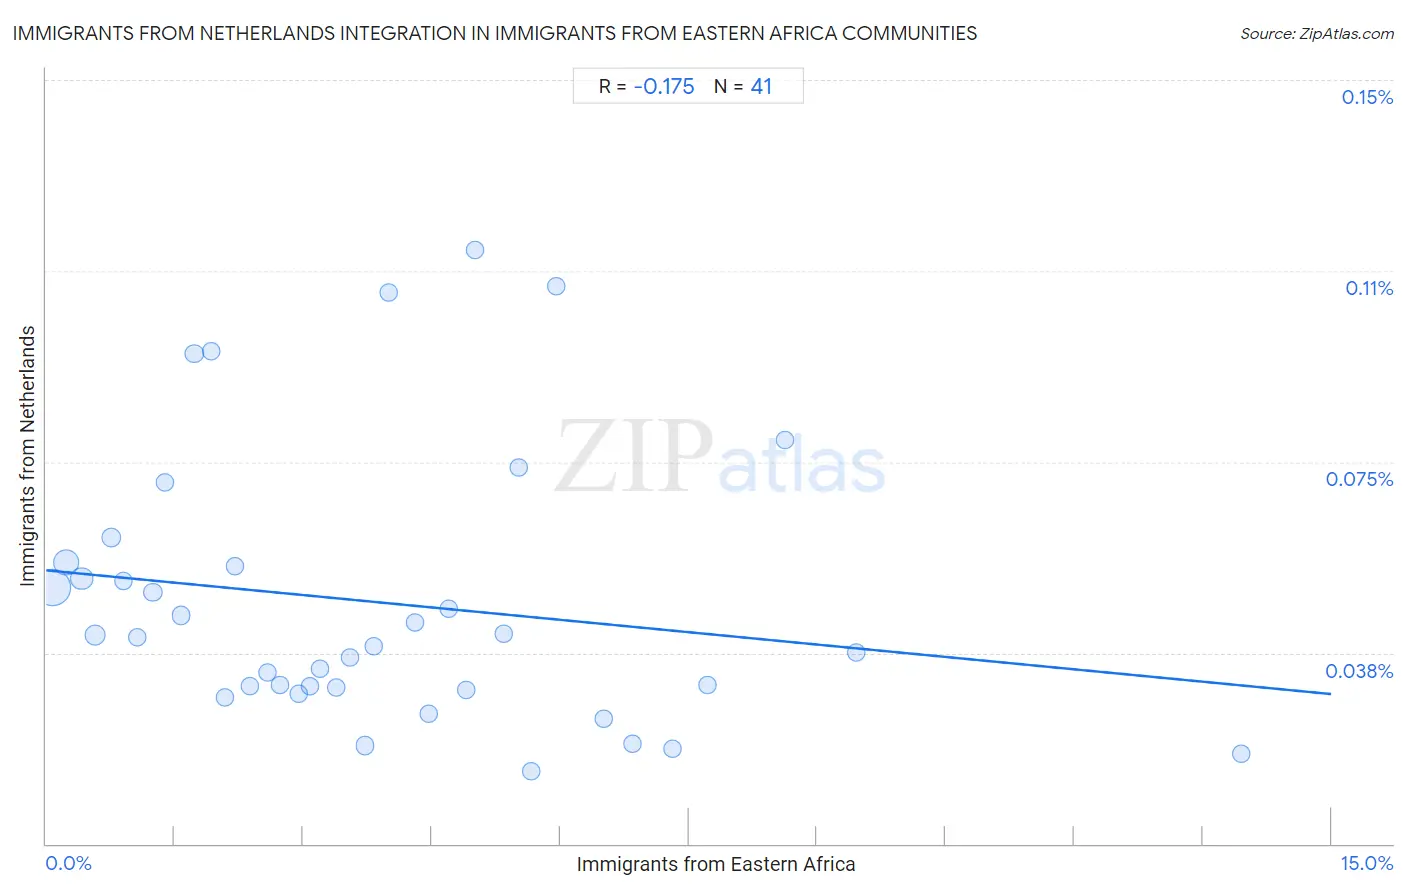 Immigrants from Eastern Africa Integration in Immigrants from Netherlands Communities